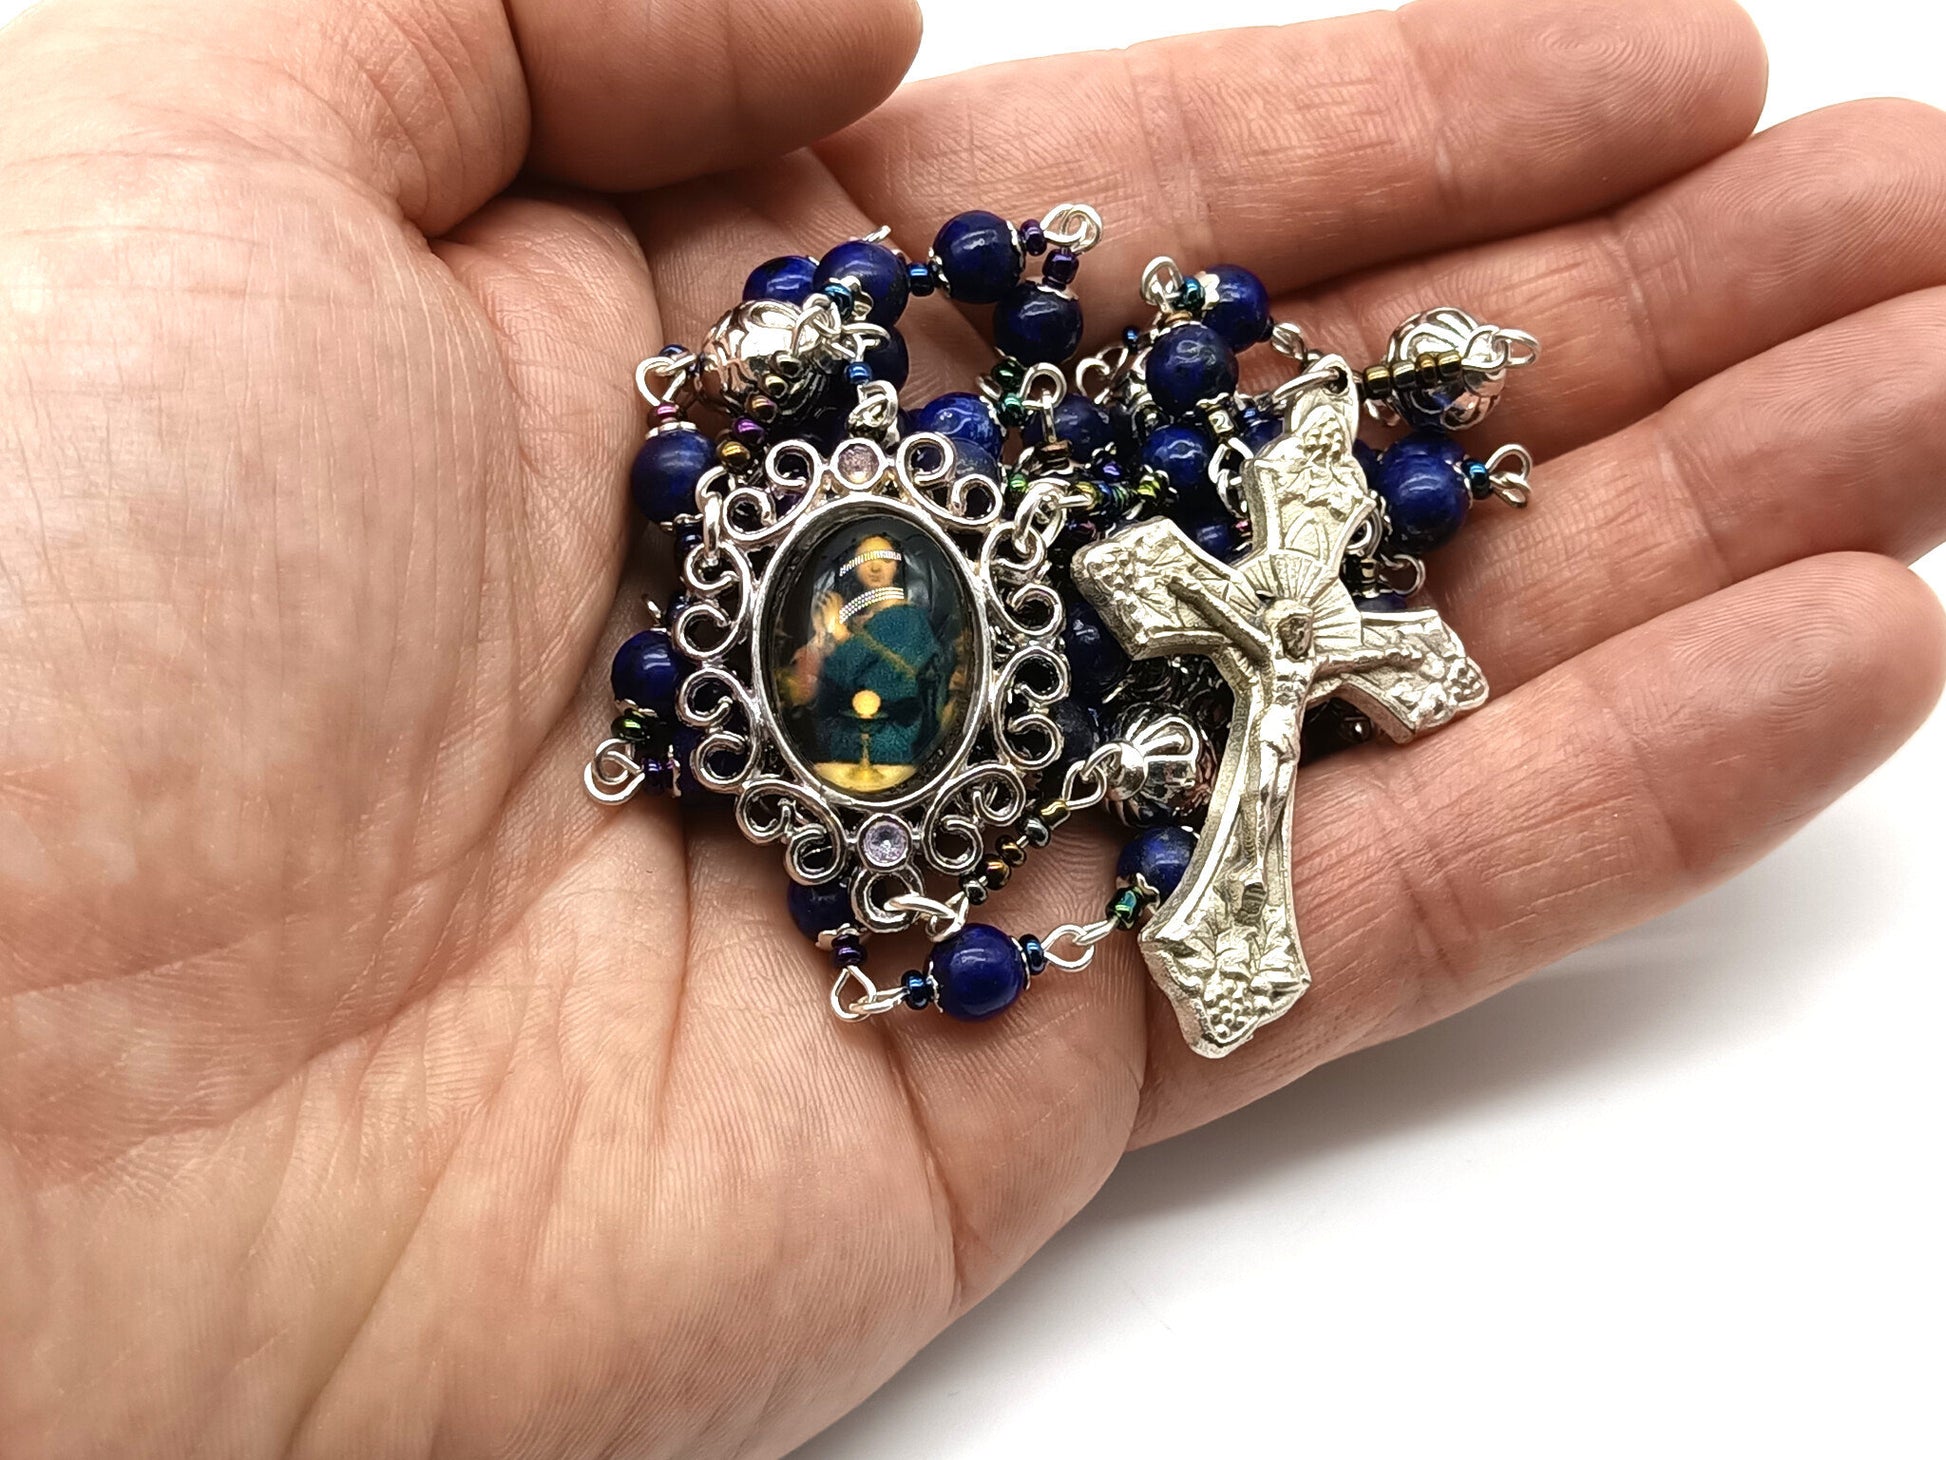 Lapis Lazuli unique rosary beads with silver crucifix, pater beads and Virgin Mary picture centre medal.